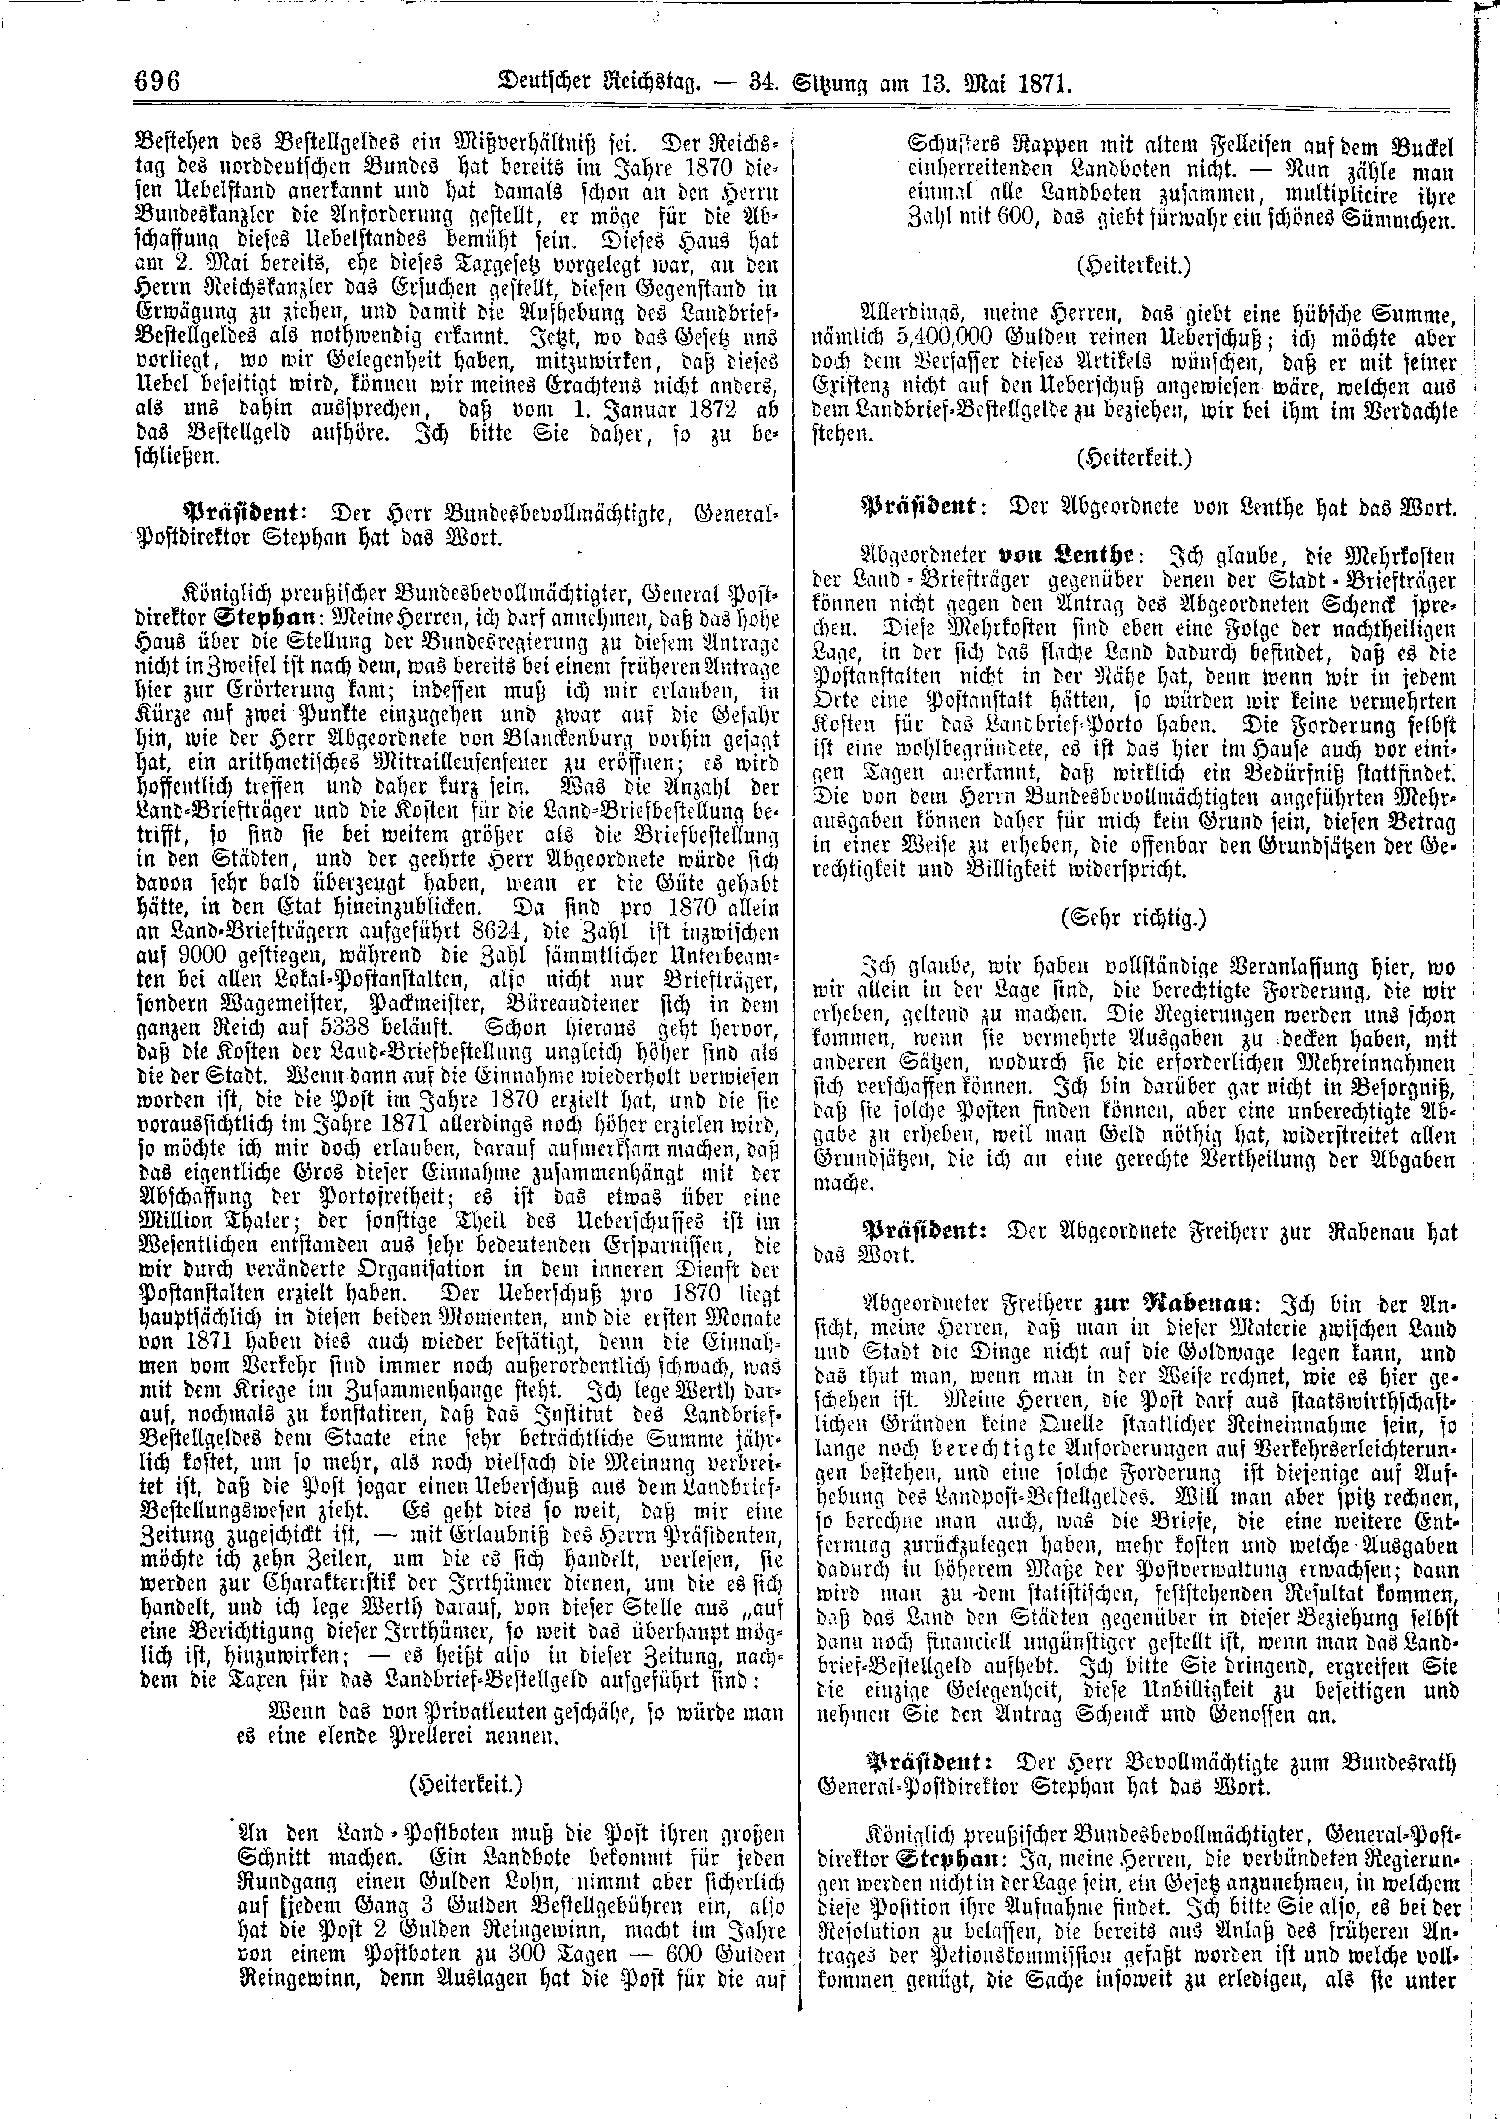 Scan of page 696